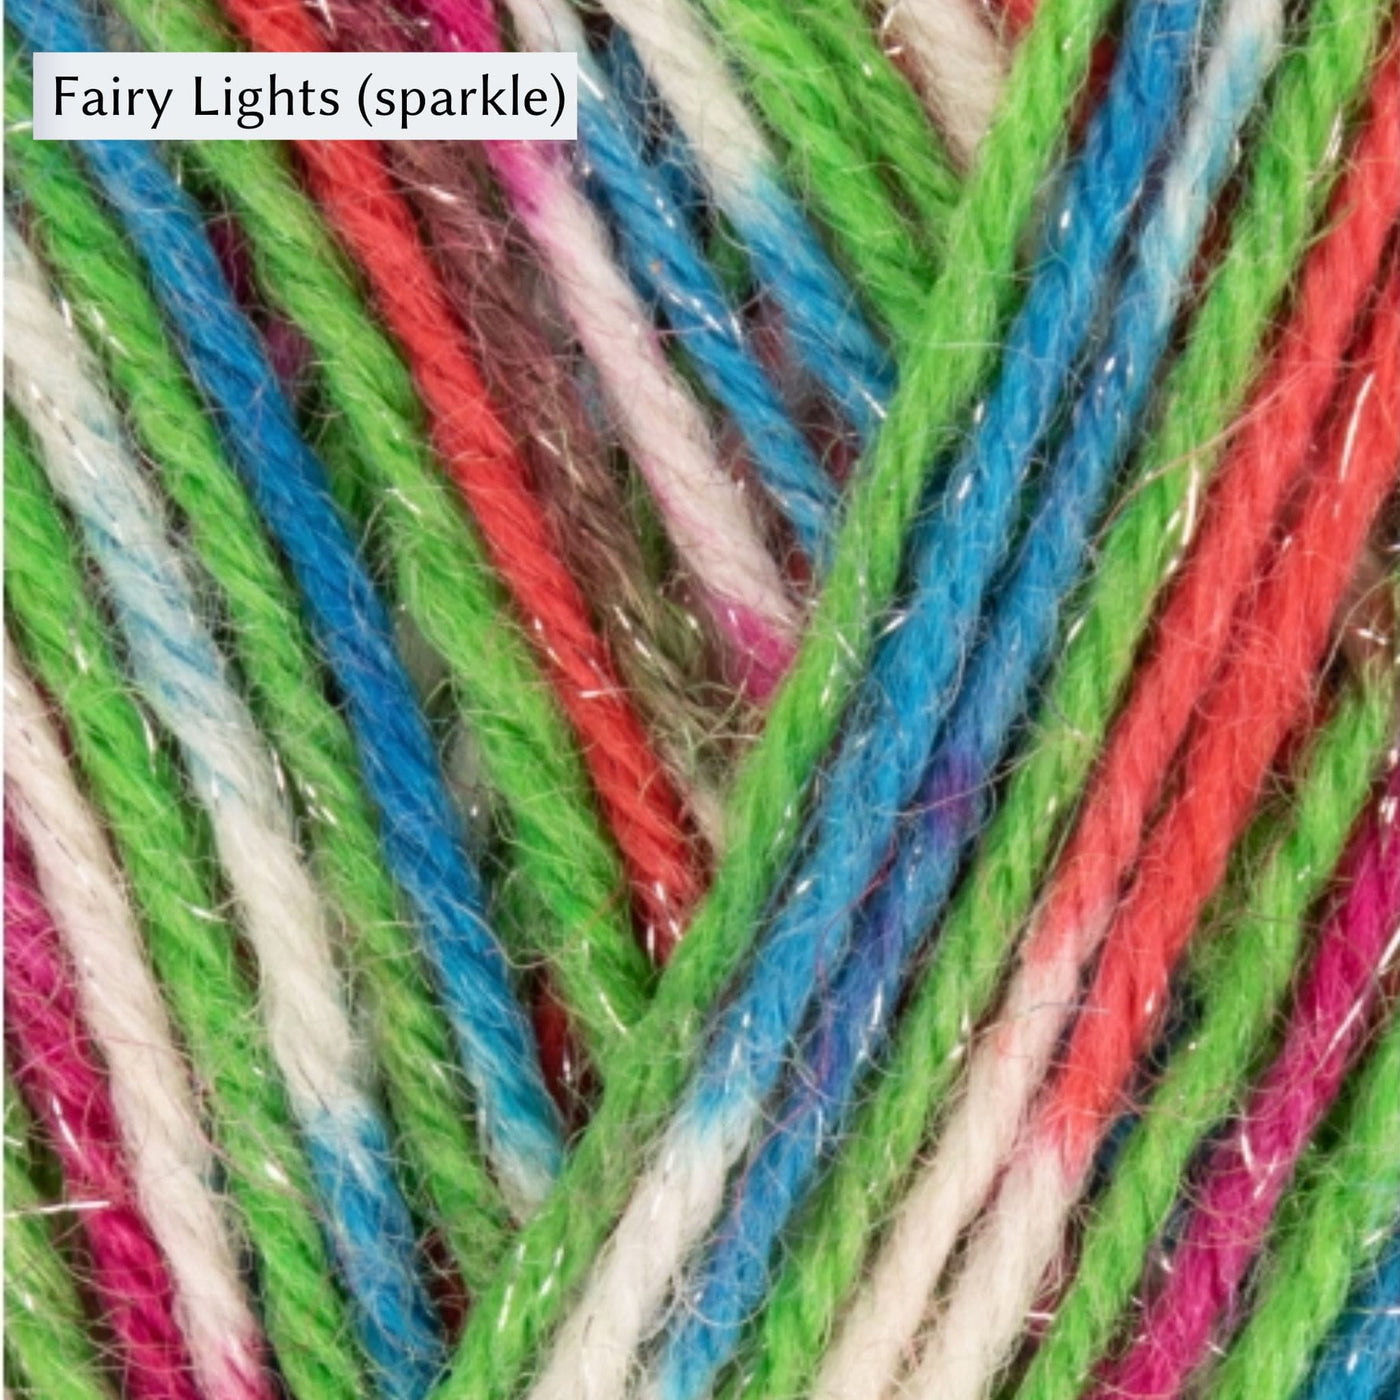 A close-up picture of West Yorkshire Spinners Signature 4ply yarn, fingering weight, in color Fairy Lights (sparkle)